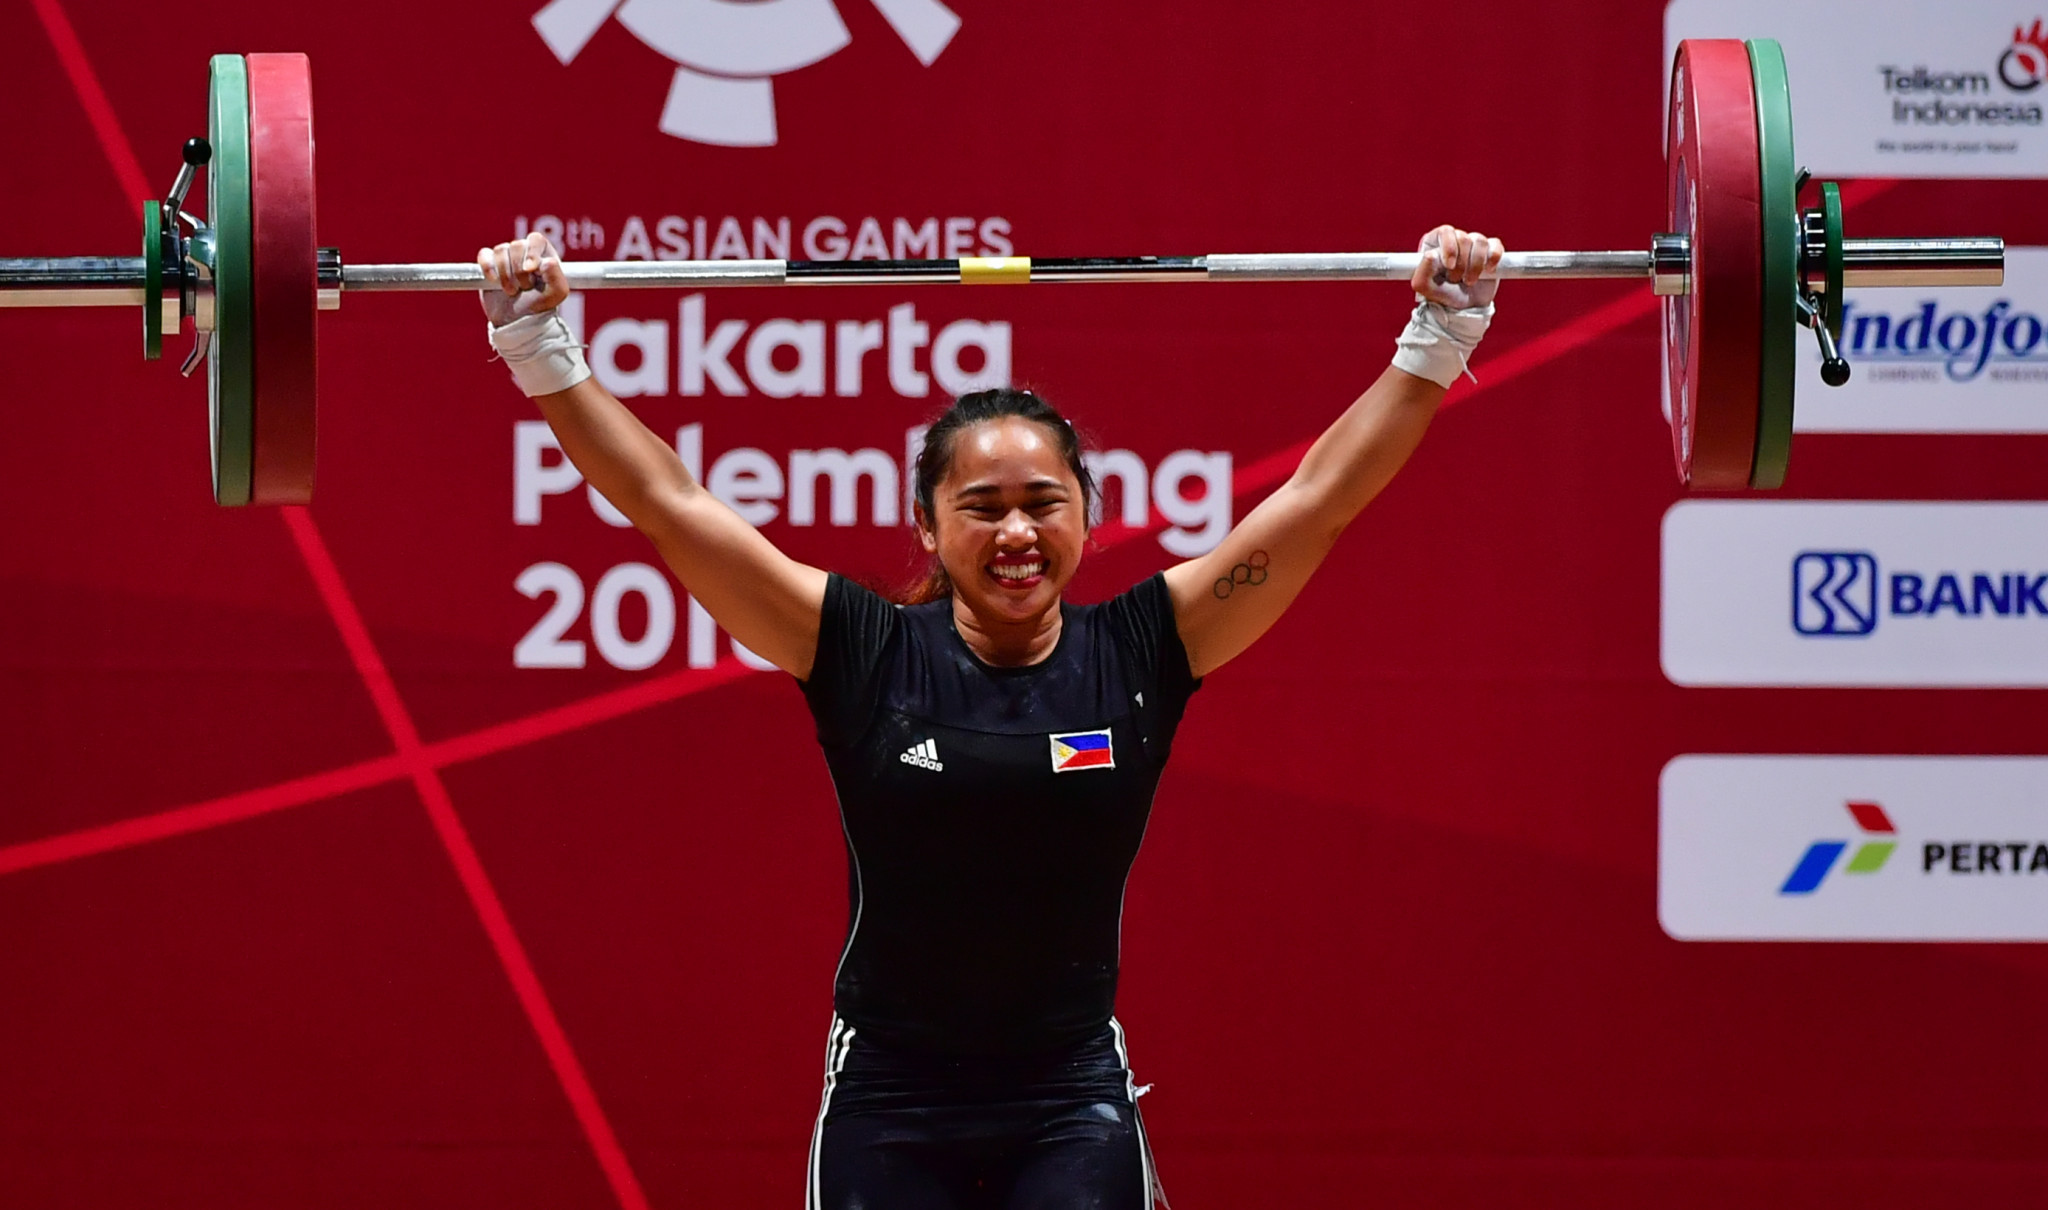 Hidilyn Diaz will represent the Philippines at the 2018 IWF World Championships, but two of her compatriots have missed out on the chance ©Getty Images